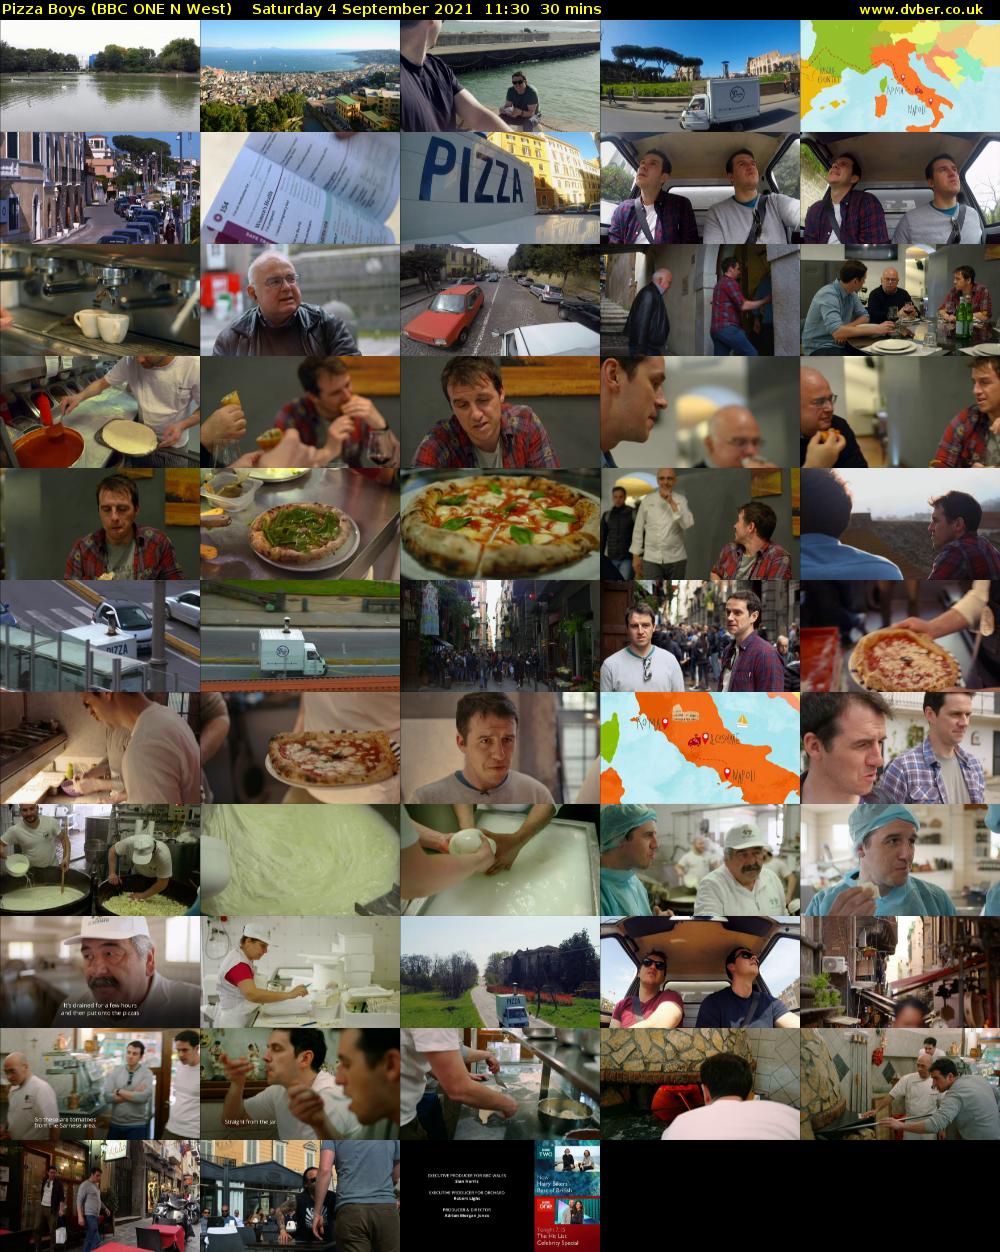 Pizza Boys (BBC ONE N West) Saturday 4 September 2021 11:30 - 12:00